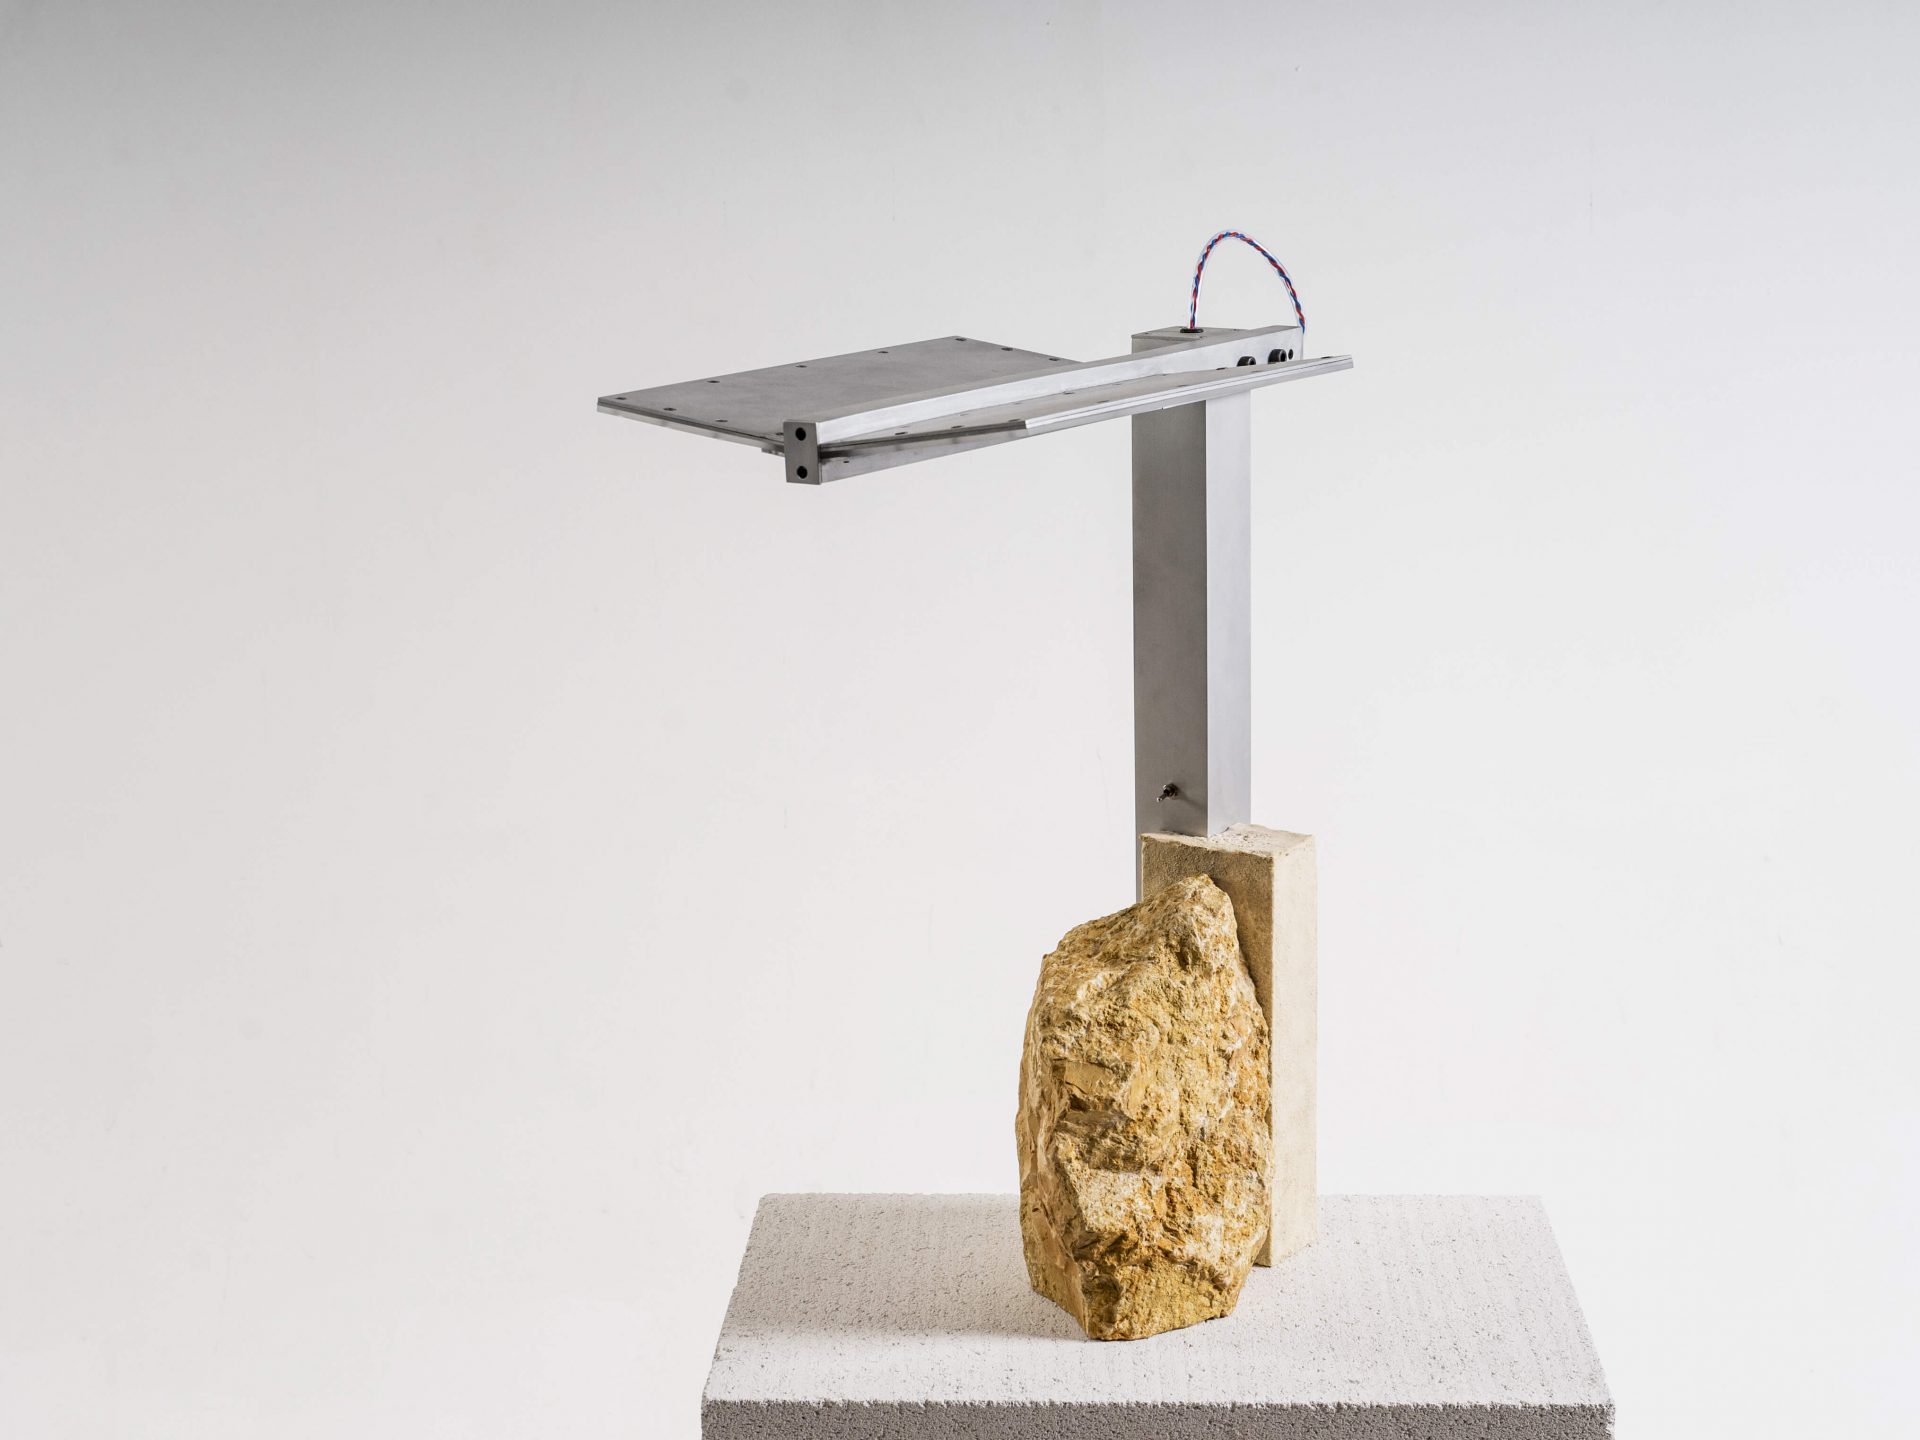 Collin Velkoff combined metal and stone